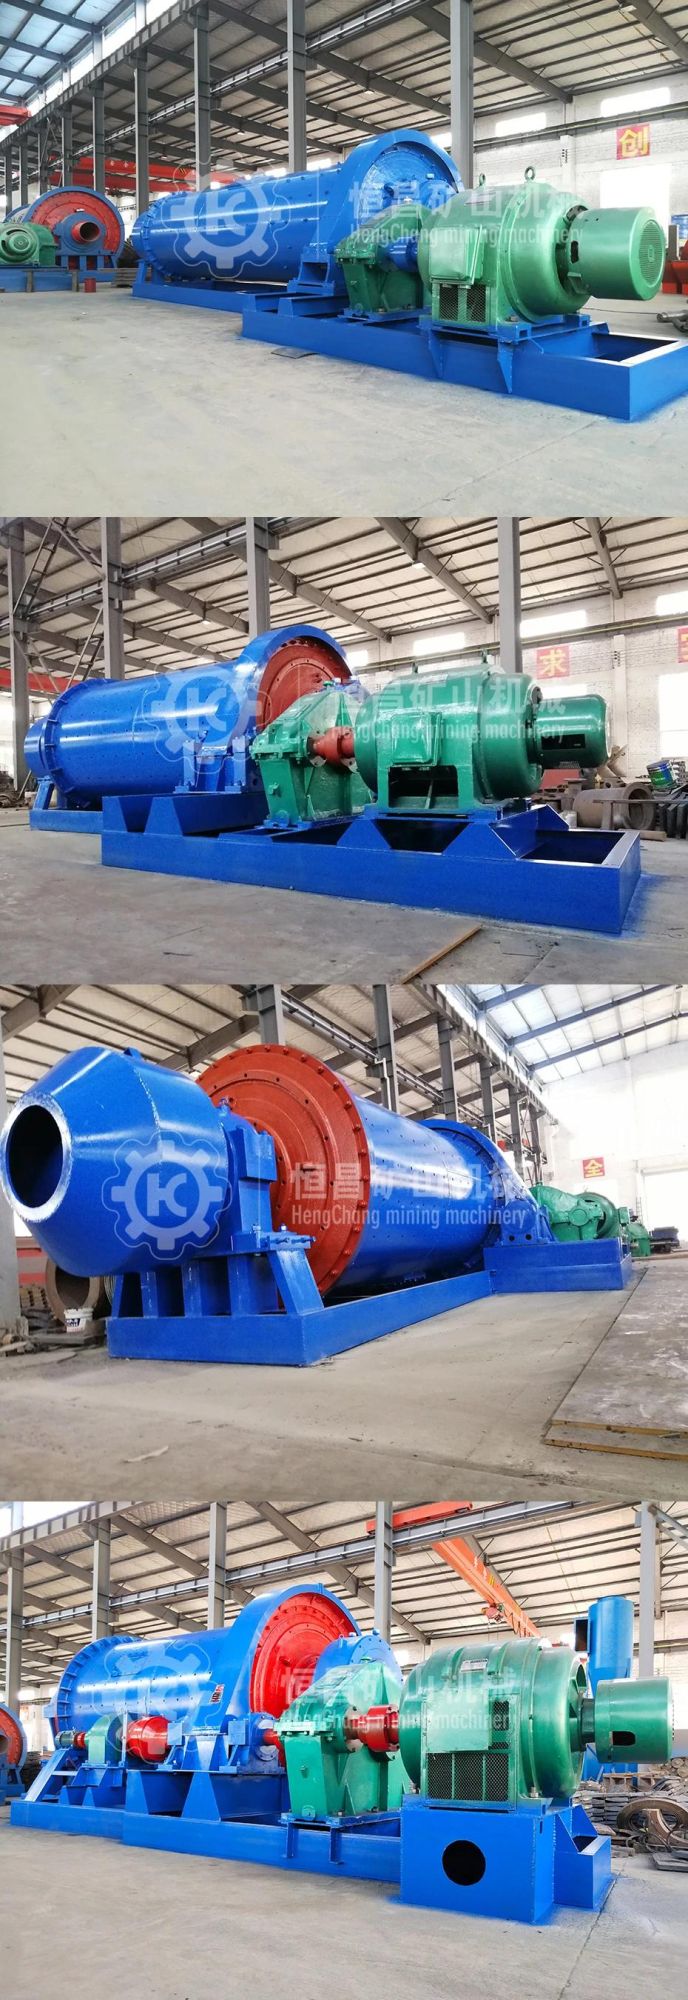 100tph Silver Ore Wet Ball Mill for Sale, Silver Milling Machine Plant